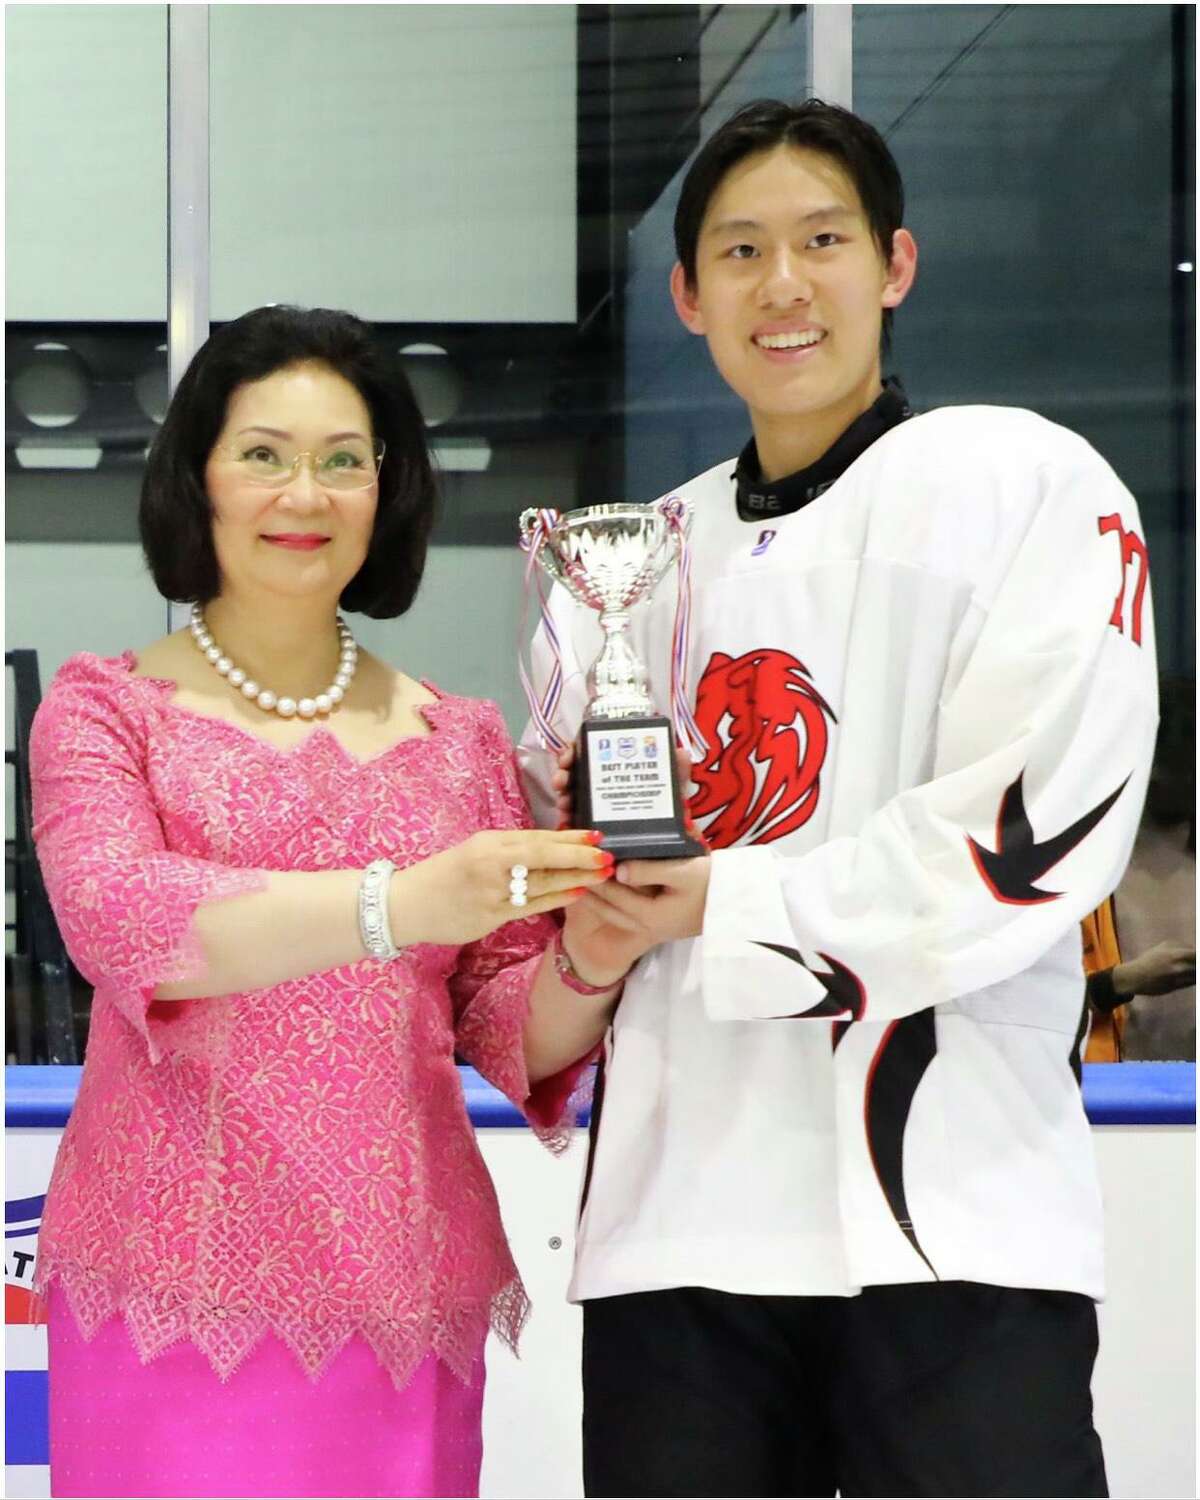 Amity’s Ben Qian, who played for the Singapore’s junior hockey team at International Ice Hockey Federation’s Under-20 Asia and Oceania Championships, with sports administrator Patama Leeswadtrakul.